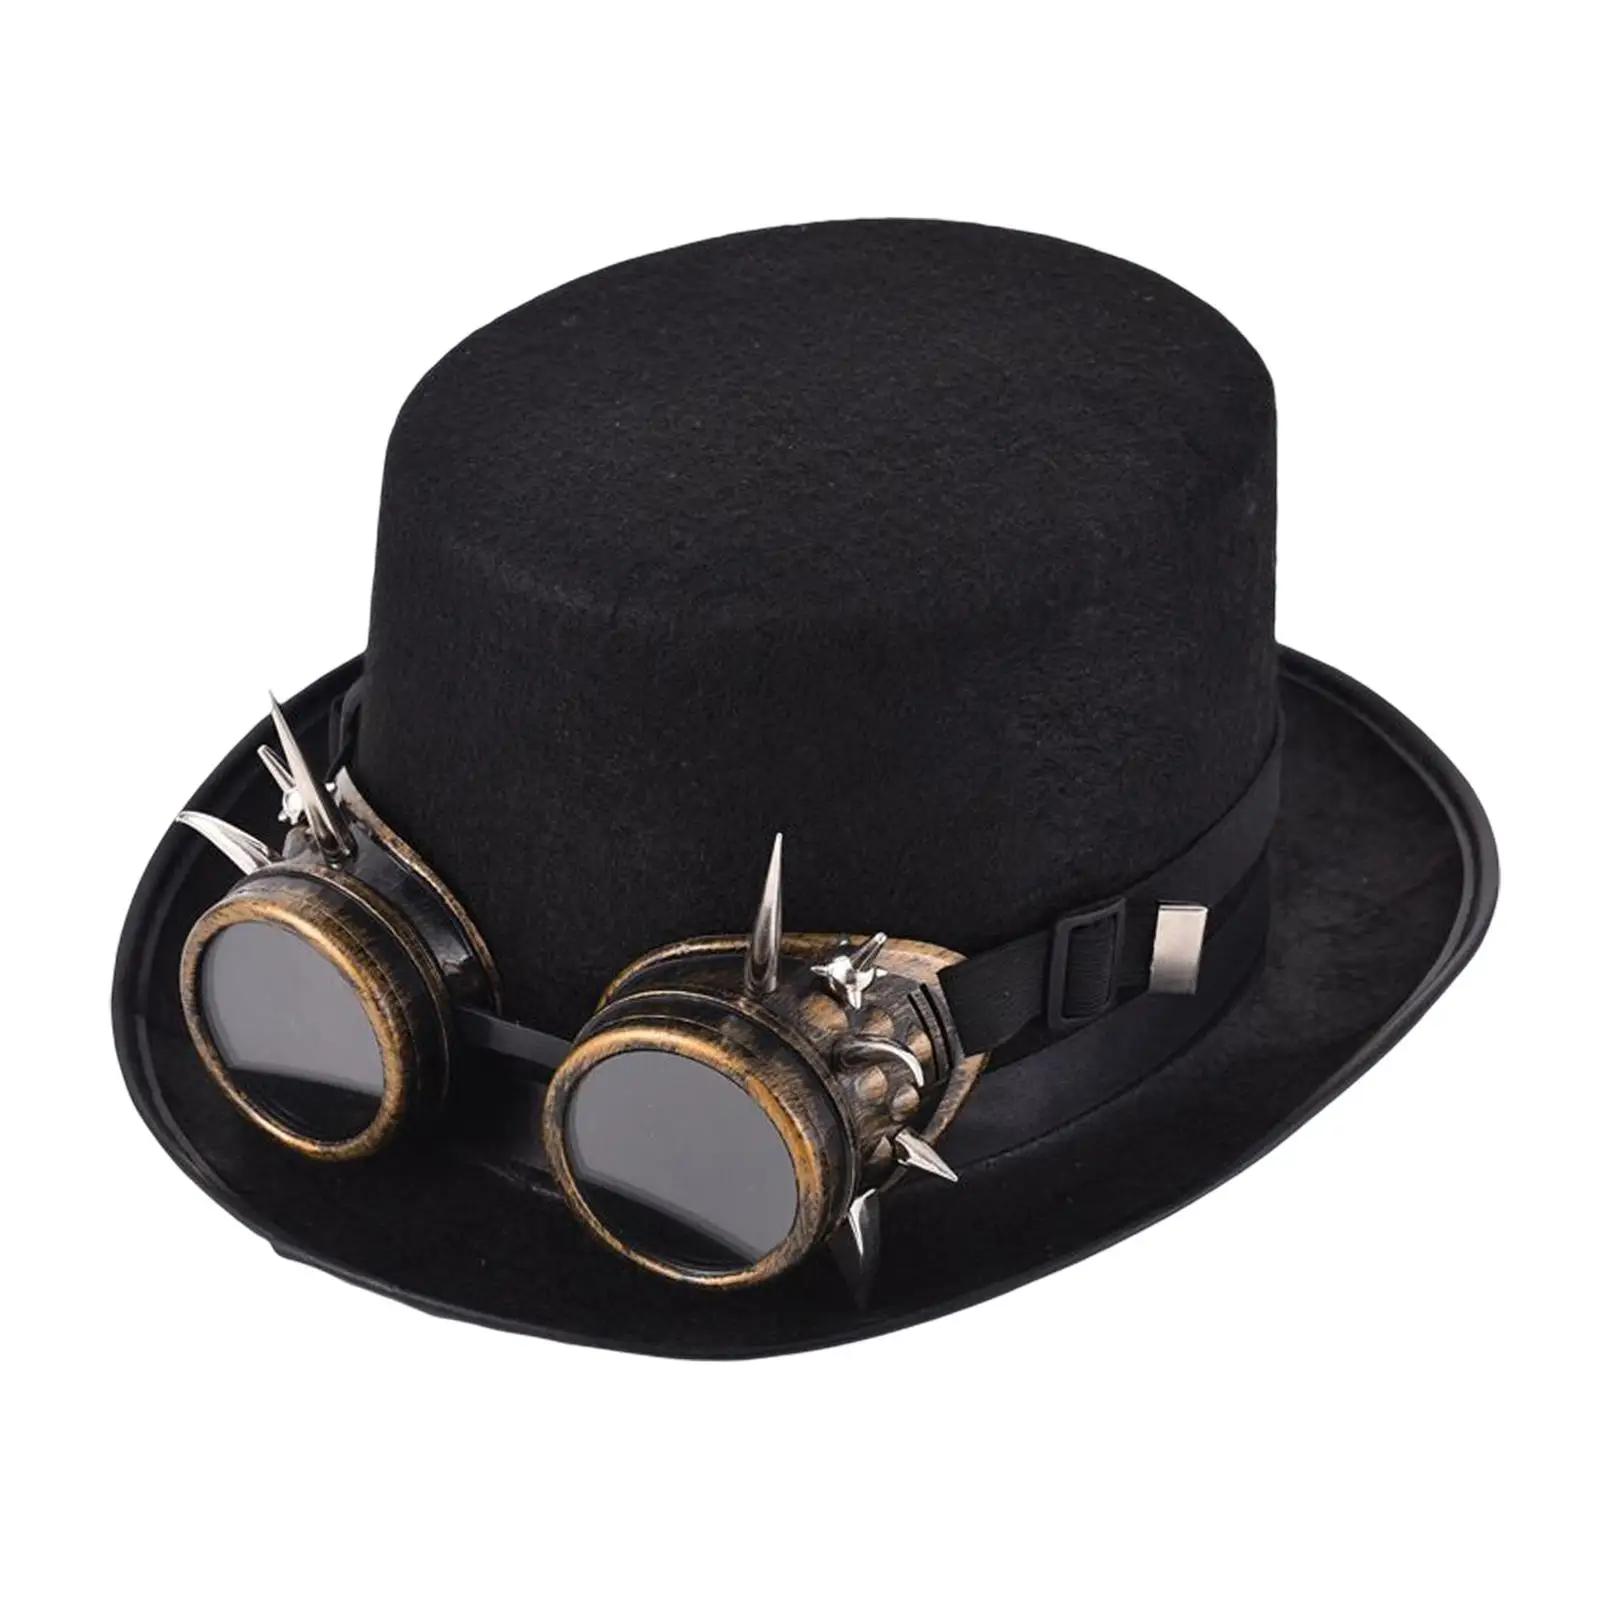 

Punk Steampunk Hat with Goggles Black Top Hat Elegant for Most Men and Women Halloween Cosplay Costume Black Made of Thick Felt